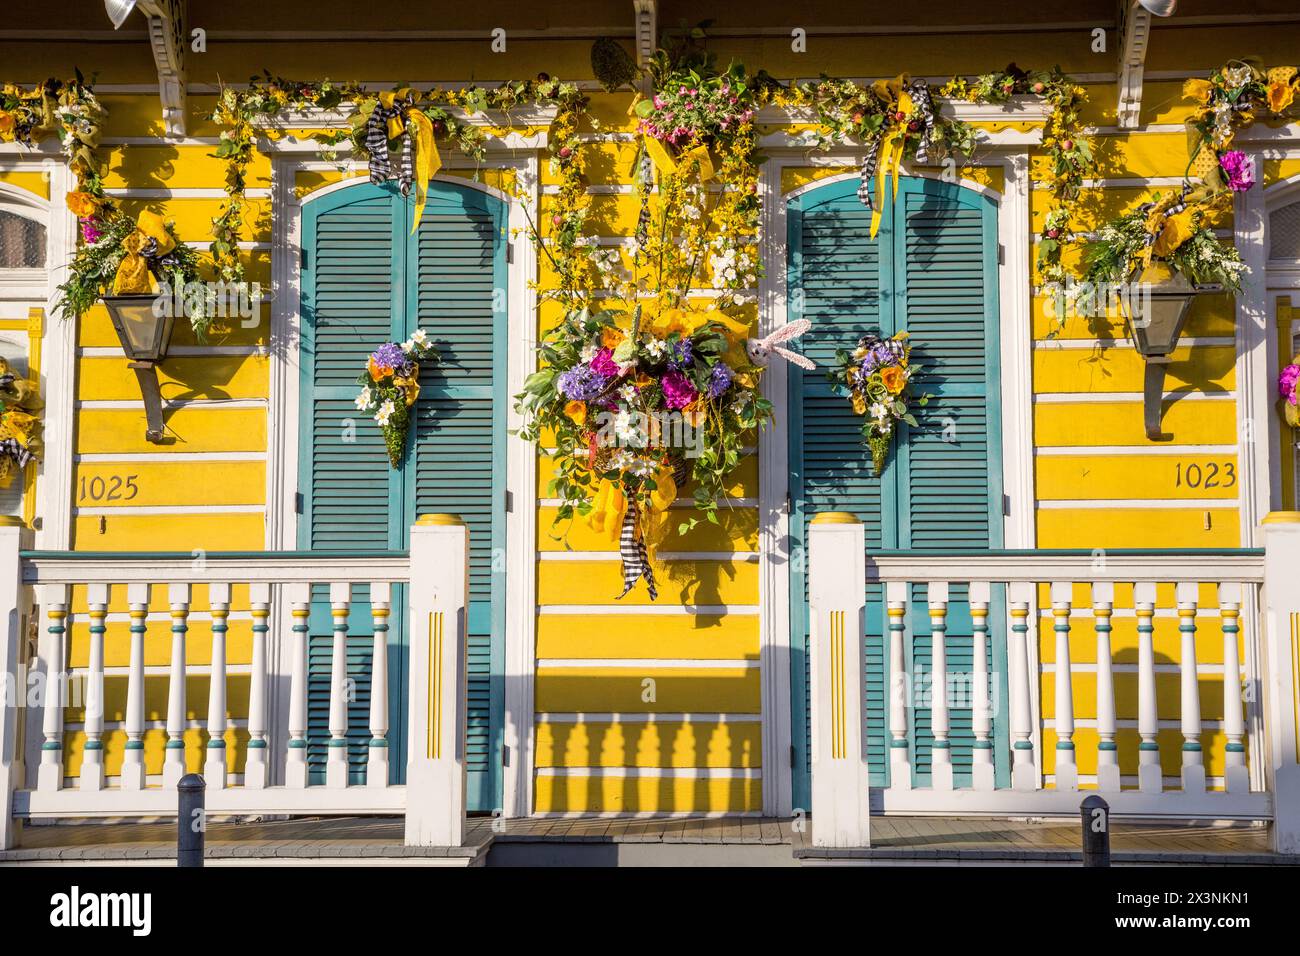 New Orleans, Louisiana. French Quarter, Shotgun-style House with Floral Decorations. Stock Photo